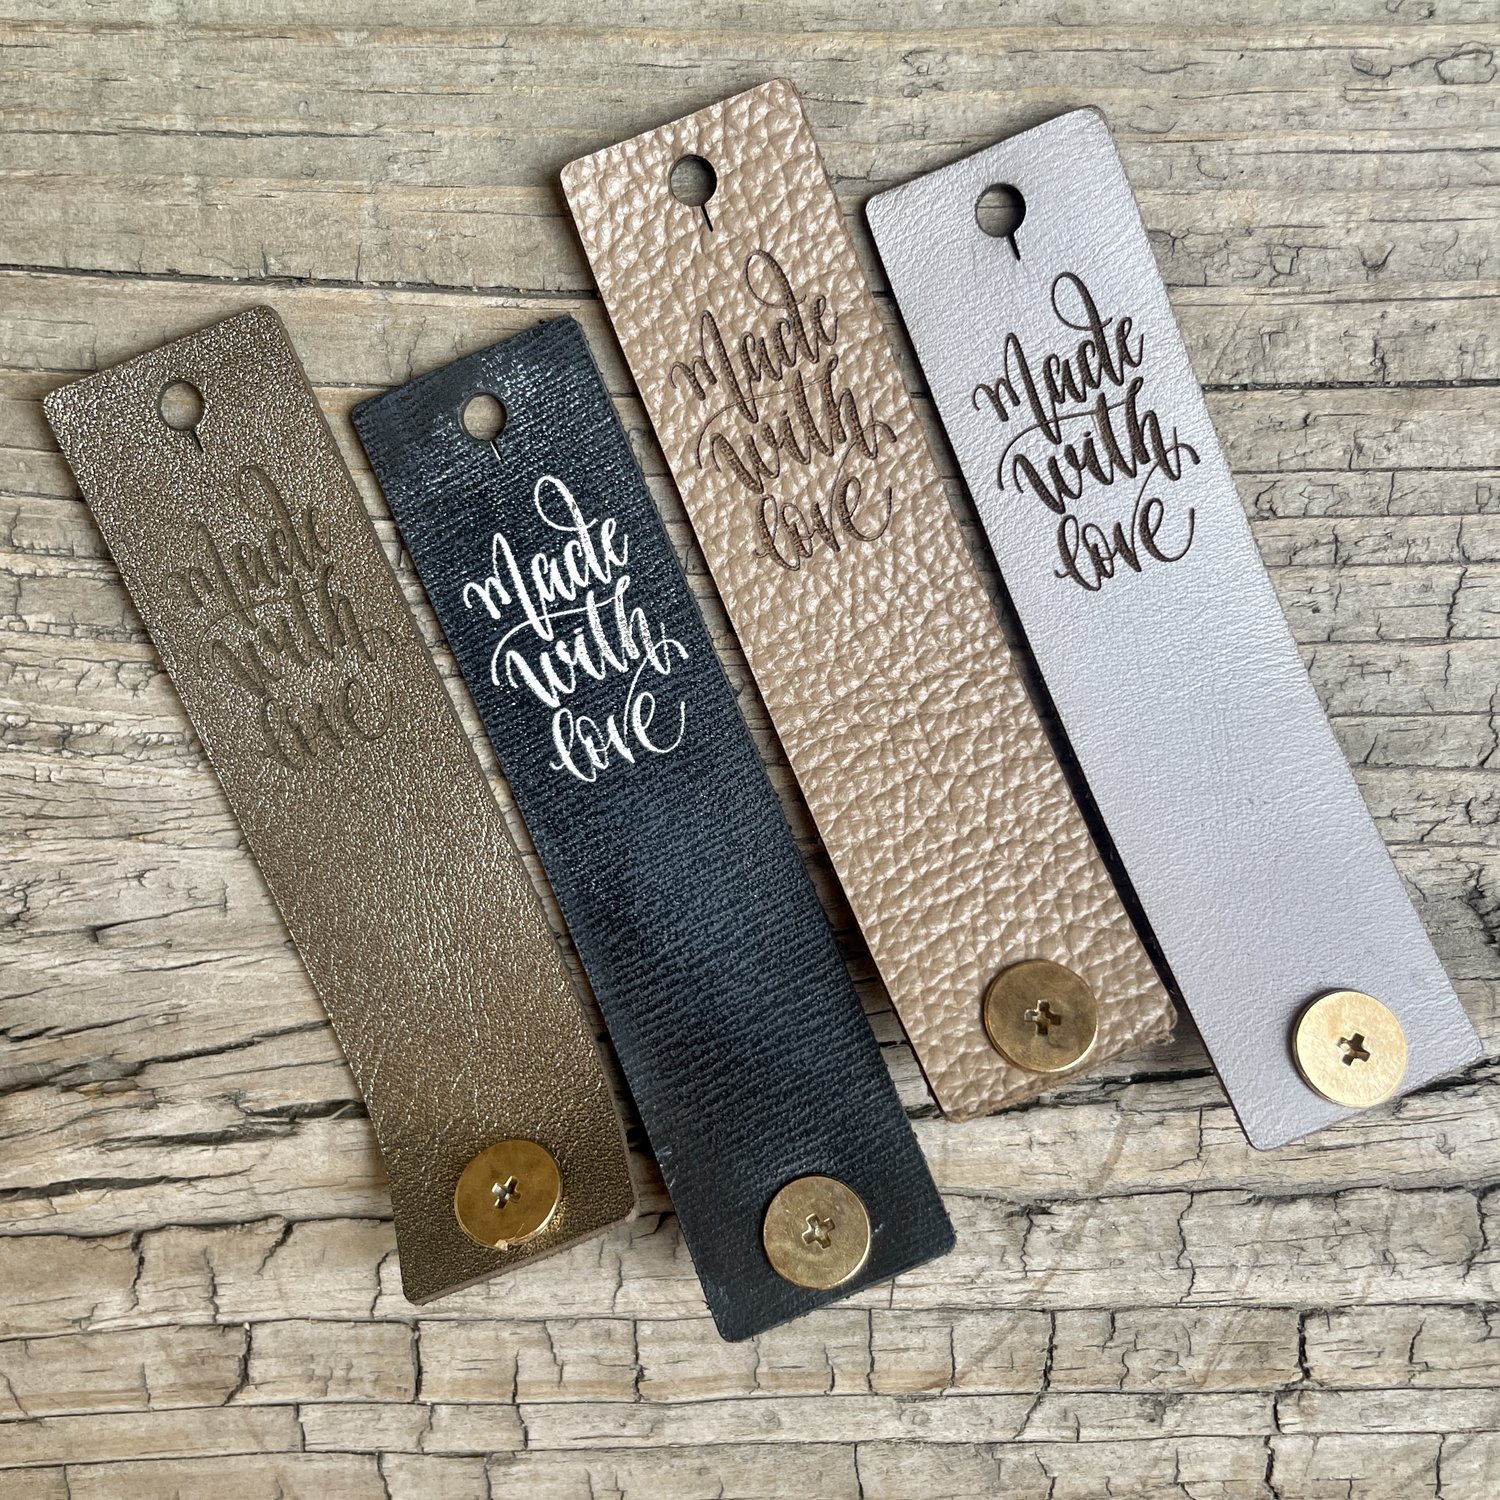 MADE WITH LOVE With Yarn Heart, Faux Suede Labels for Handmade Items, Faux  Leather Tags, Sewing Tag, Tags for Crochet Knitting Sewing Labels 